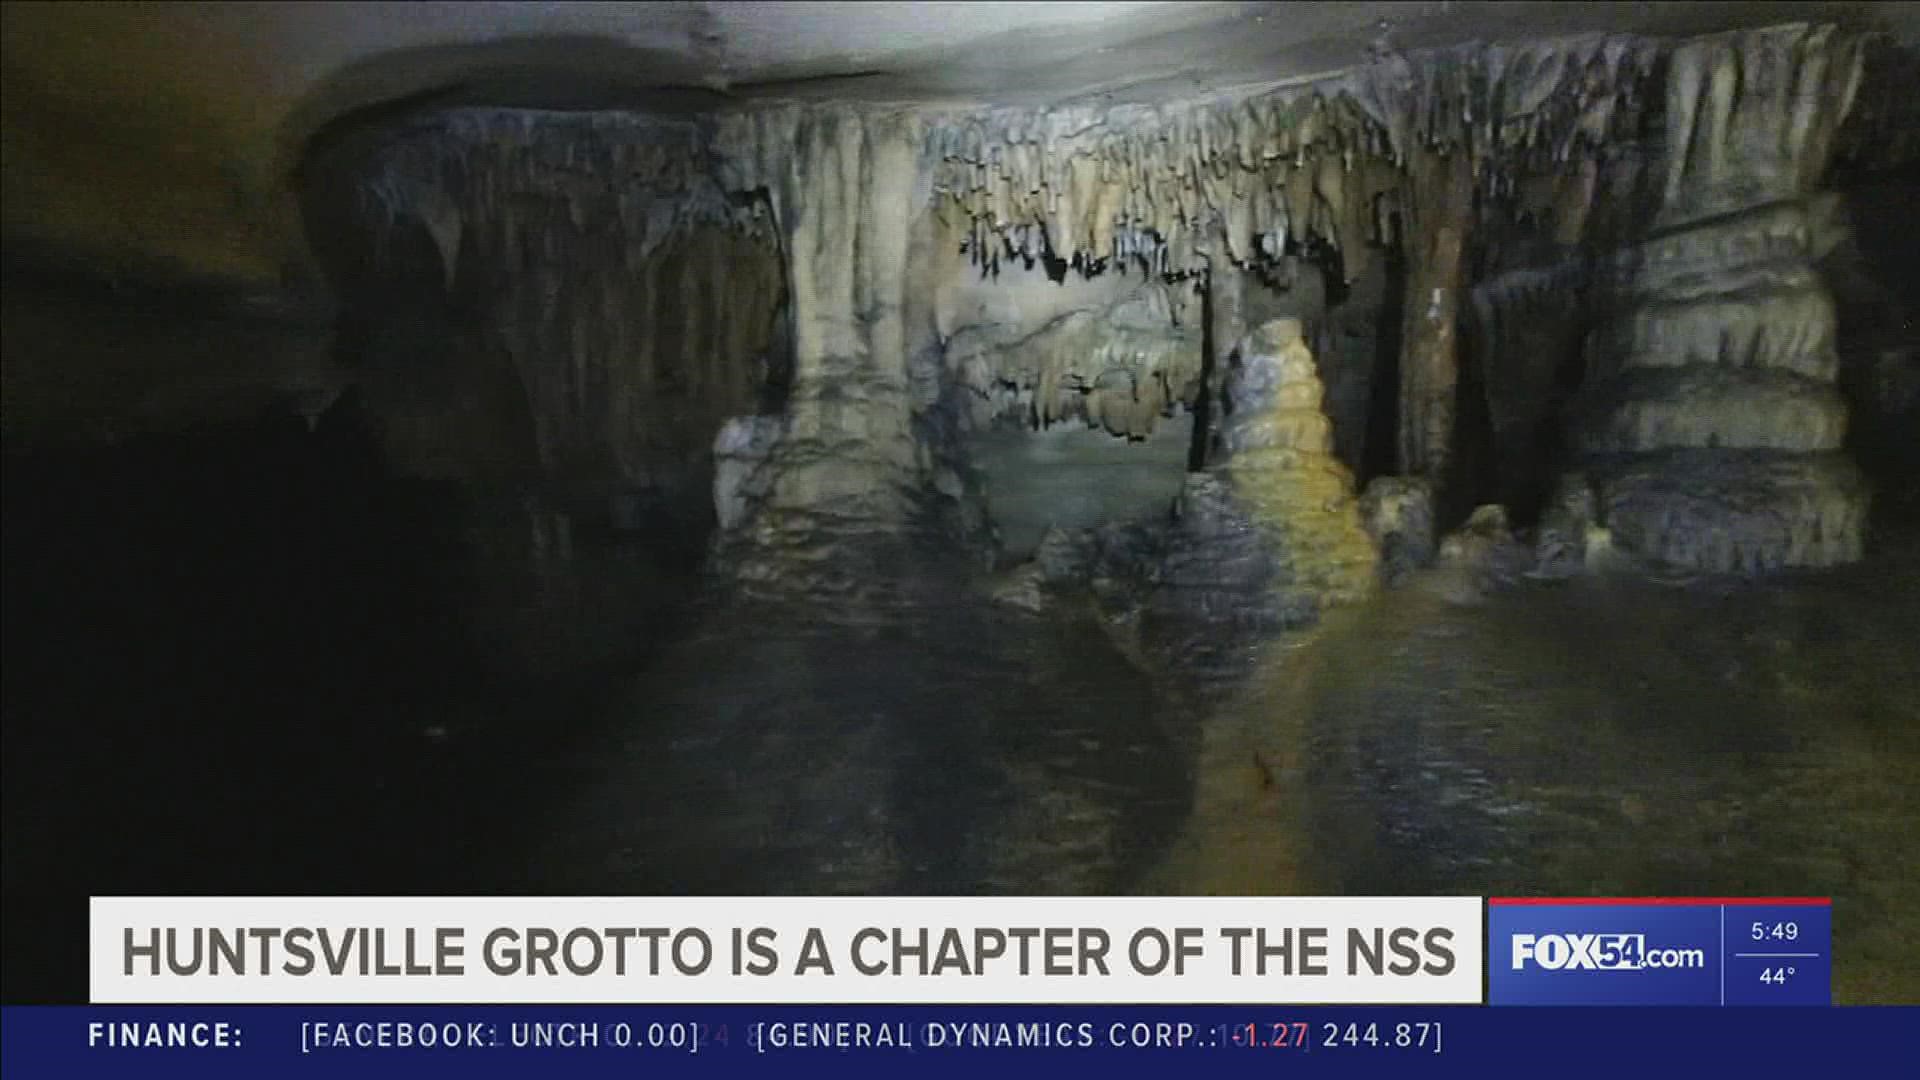 The Huntsville Grotto brings together people from all backgrounds who share a common interest: love of caves.